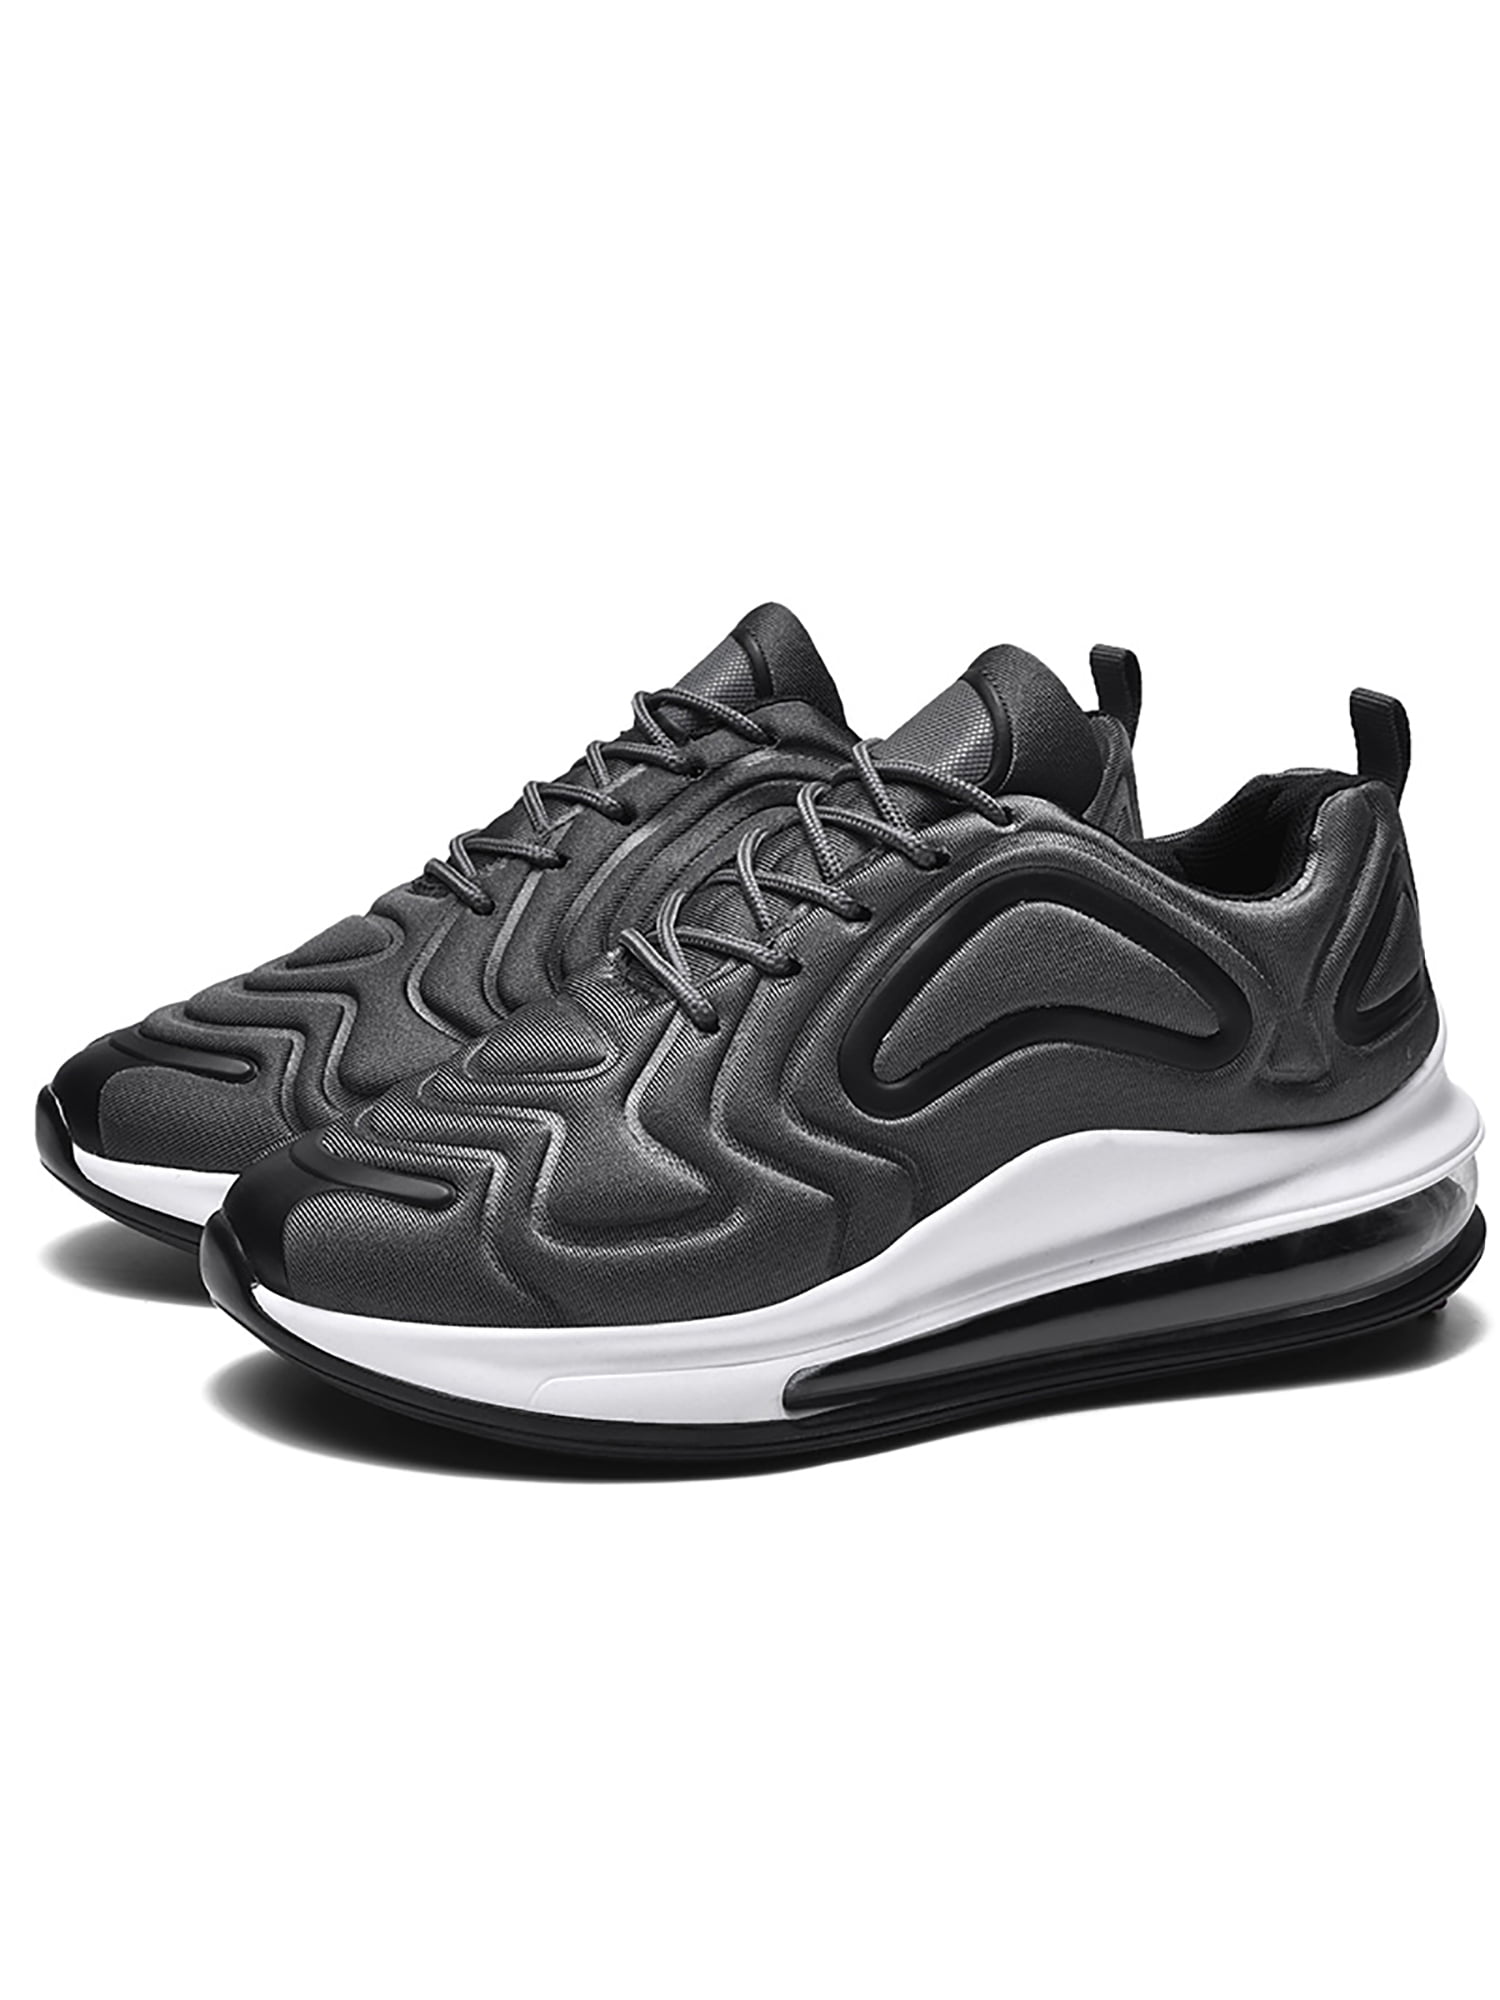 Mens Running Sport Trainers Air Cushion Shock Absorbing Casual Walking Gym shoes 